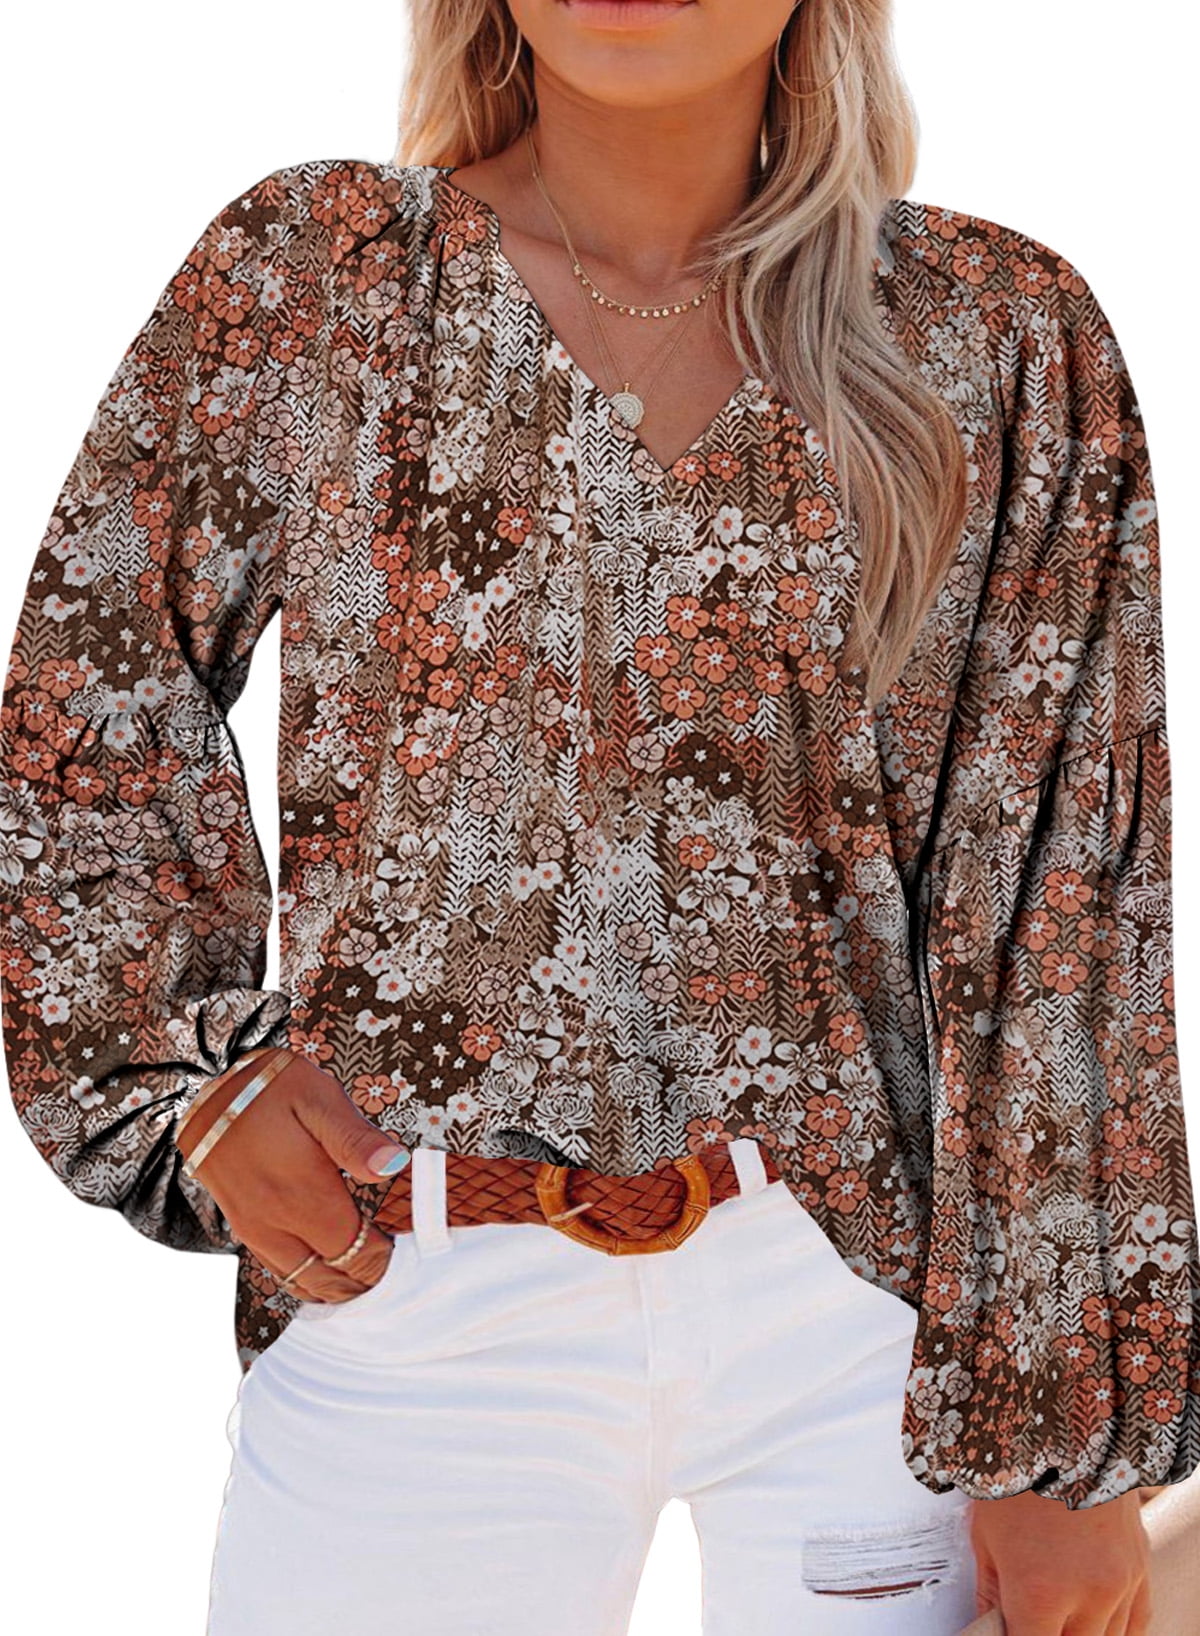 Dropship Women's Casual Boho Floral Print V Neck Long Sleeve Loose Blouses  Shirts Tops to Sell Online at a Lower Price